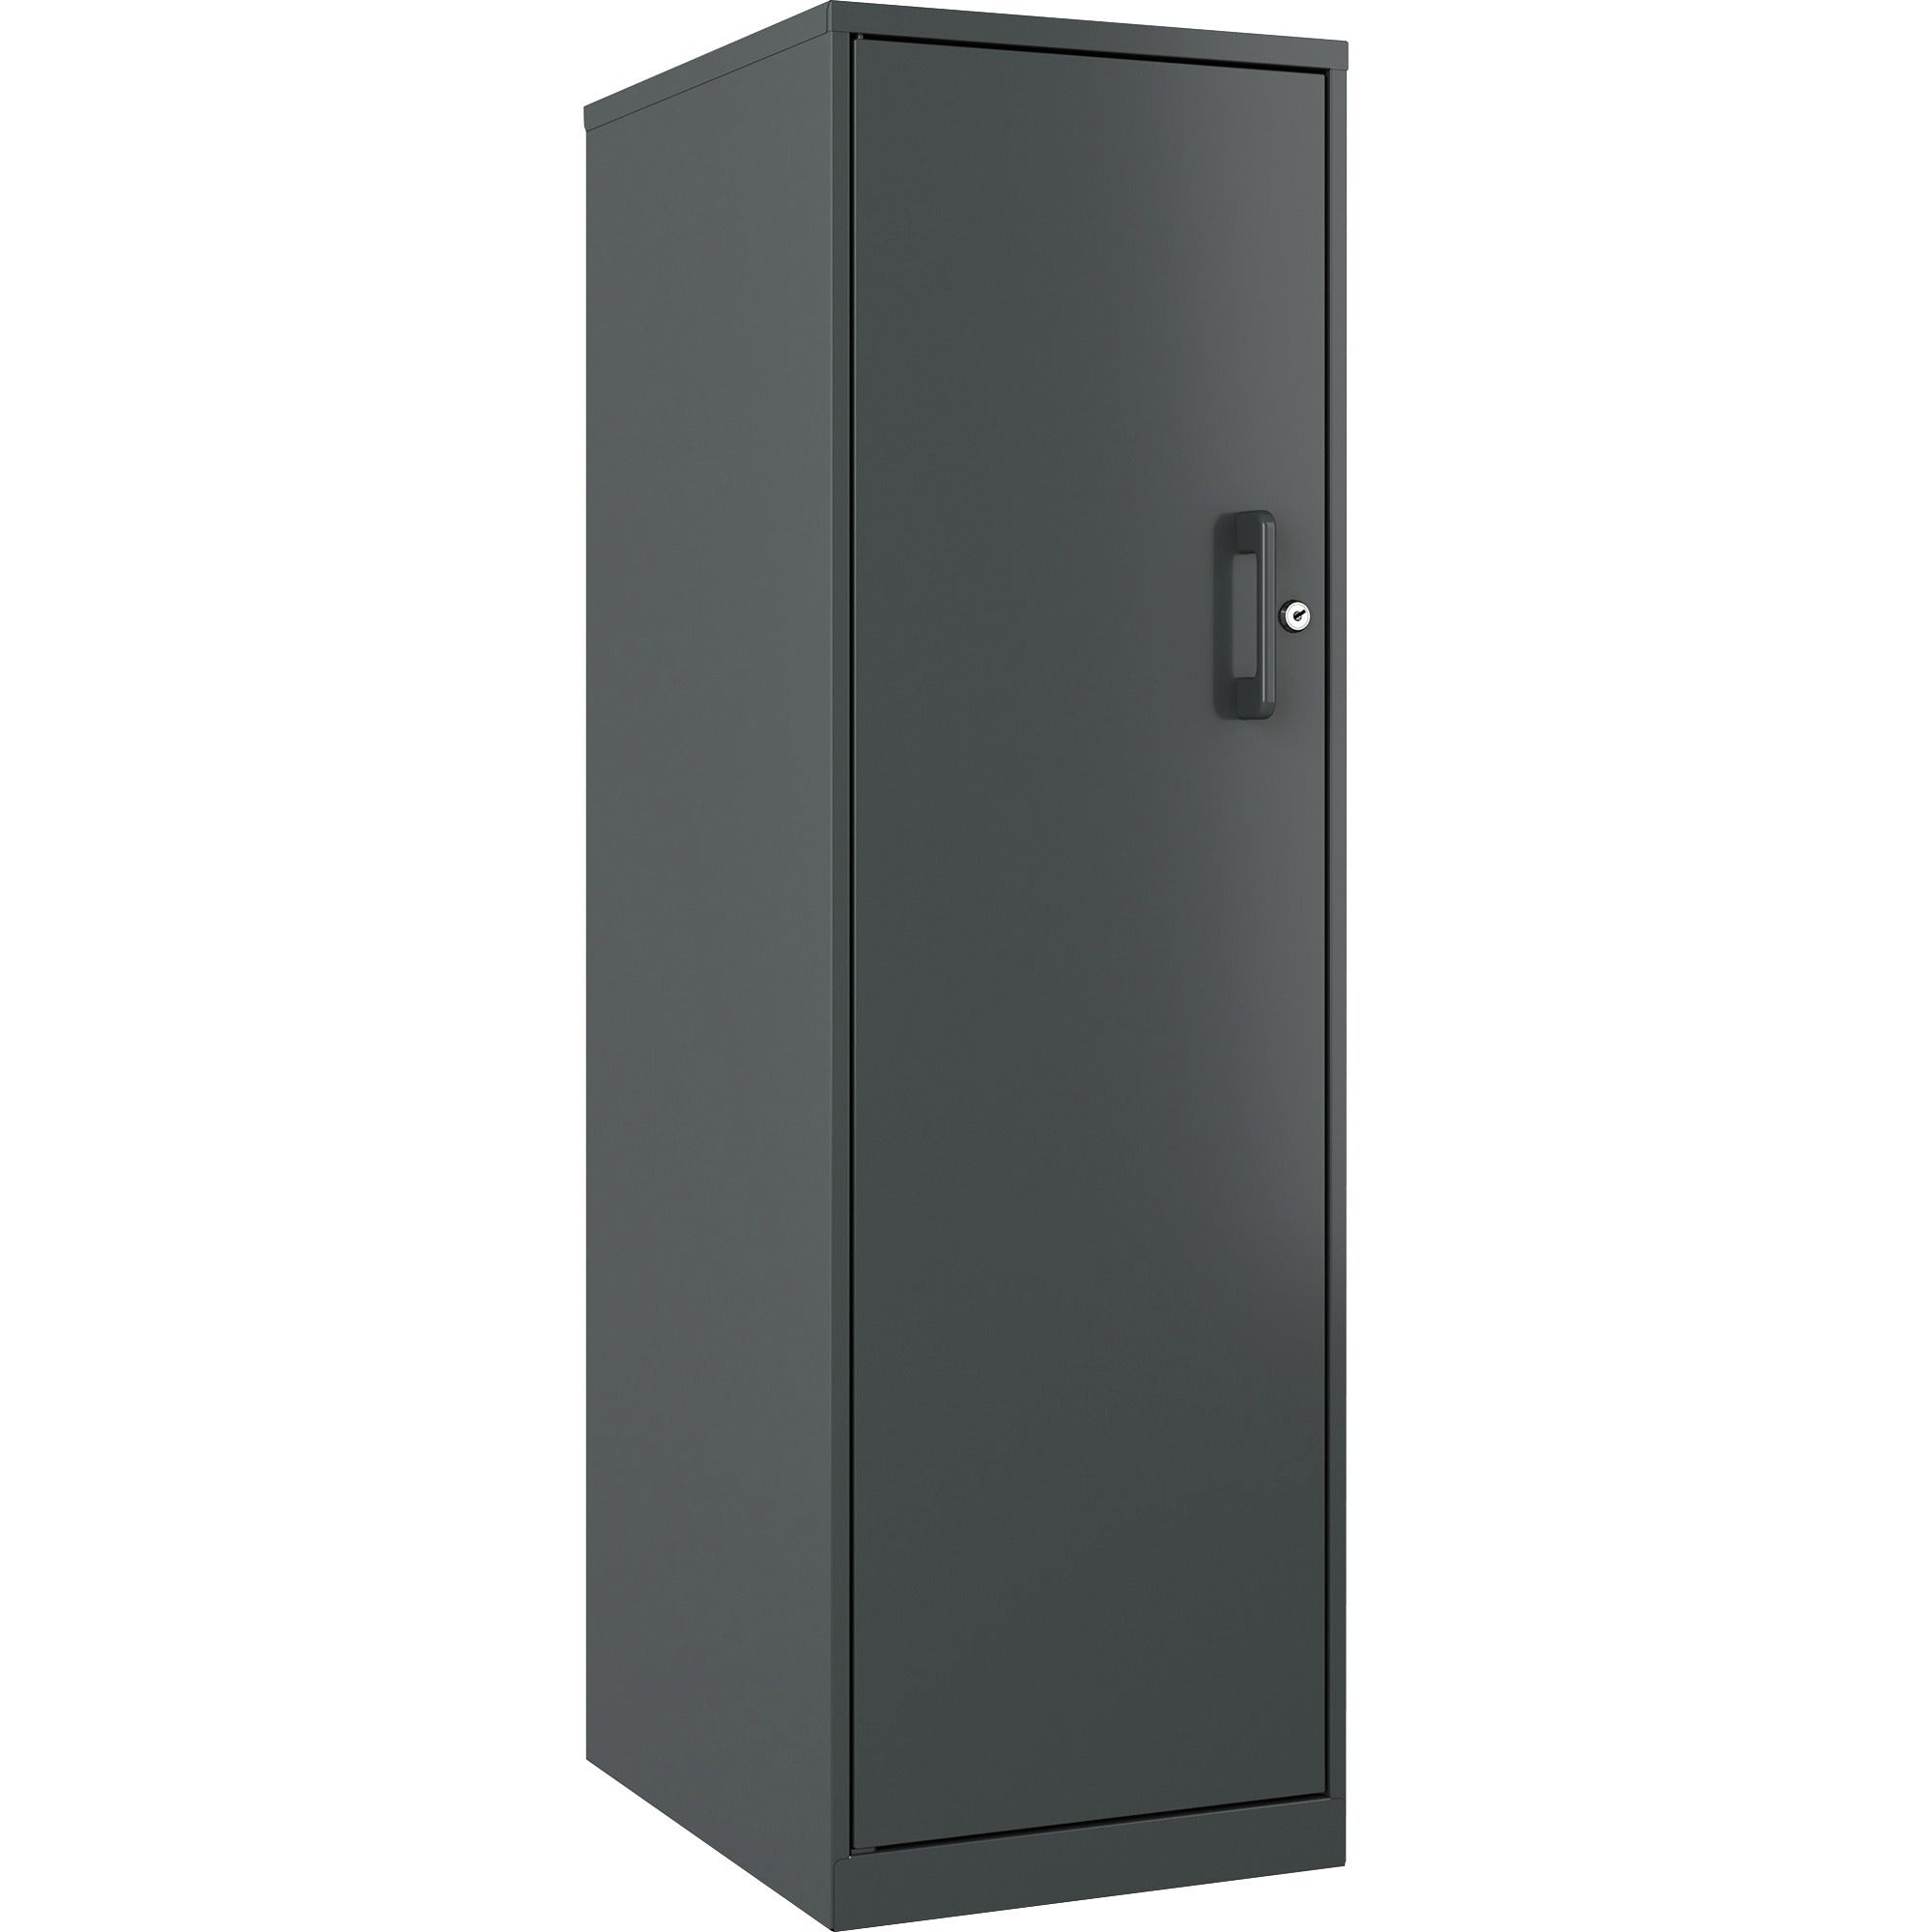 nusparc-personal-storage-cabinet-18-x-142-x-464-4-x-shelfves-hinged-doors-sturdy-durable-welded-eco-friendly-nonporous-surface-locking-mechanism-ventilated-locking-door-graphite-steel-recycled-taa-compliant_nprsc418zzml - 1